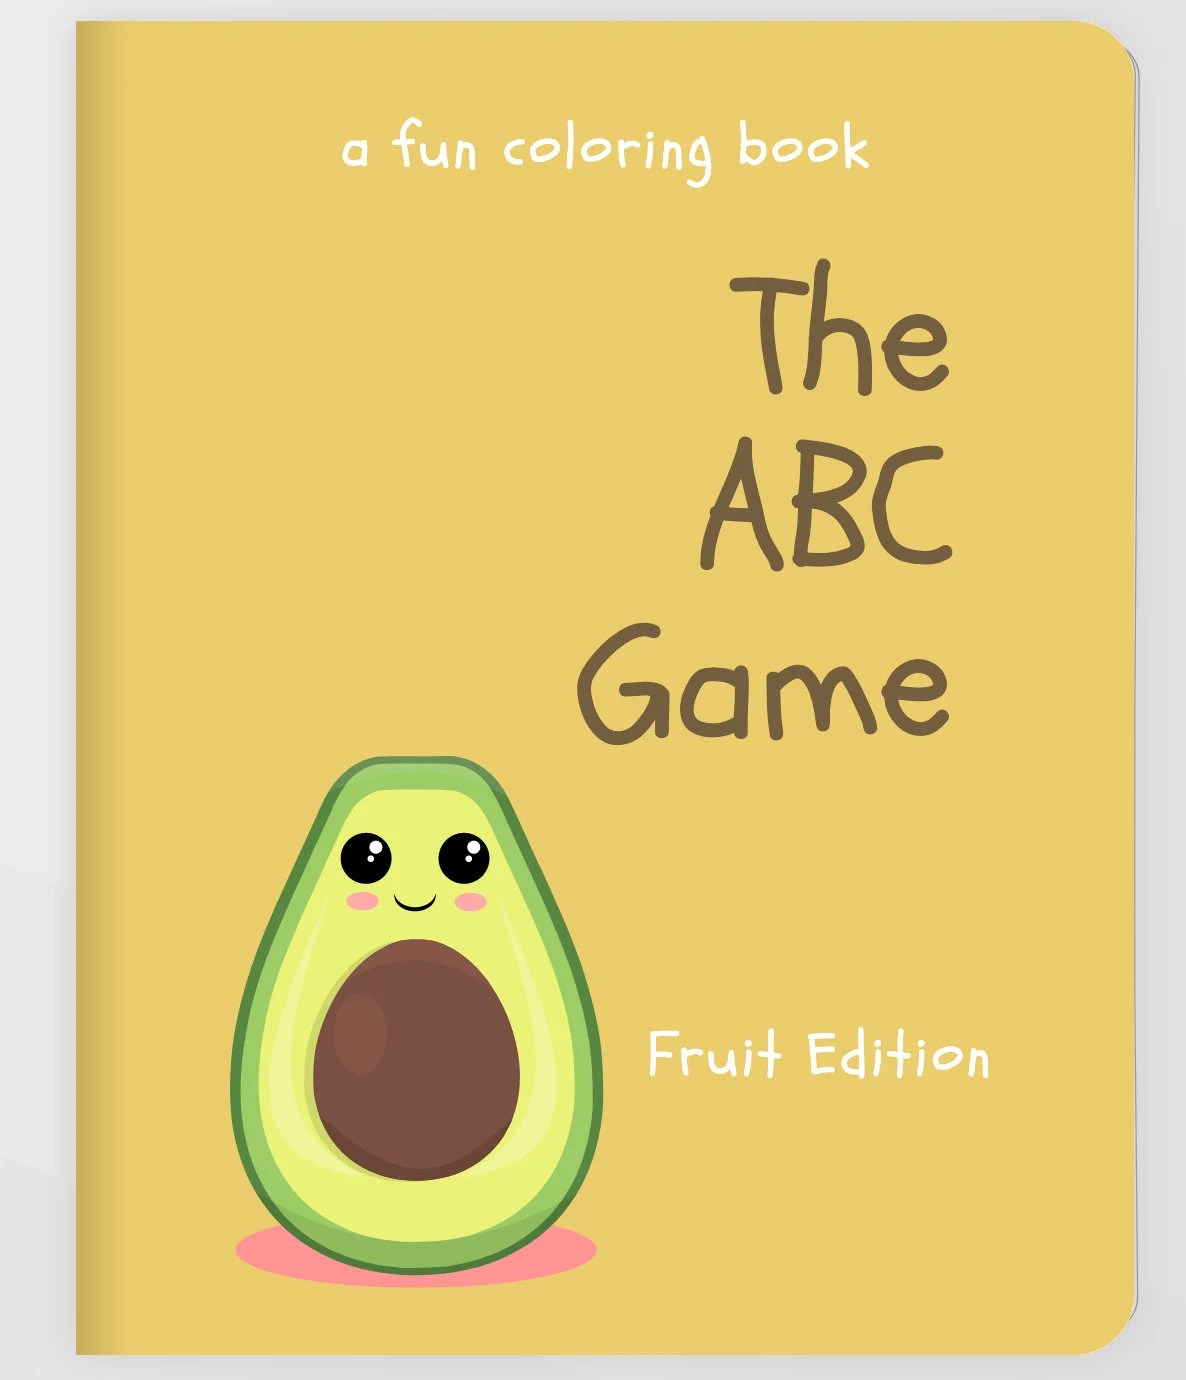 iPad Coloring Book | The ABC Game Fruit Edition | Digital Download Printable. For Kids, Family. Classrooms, Home School